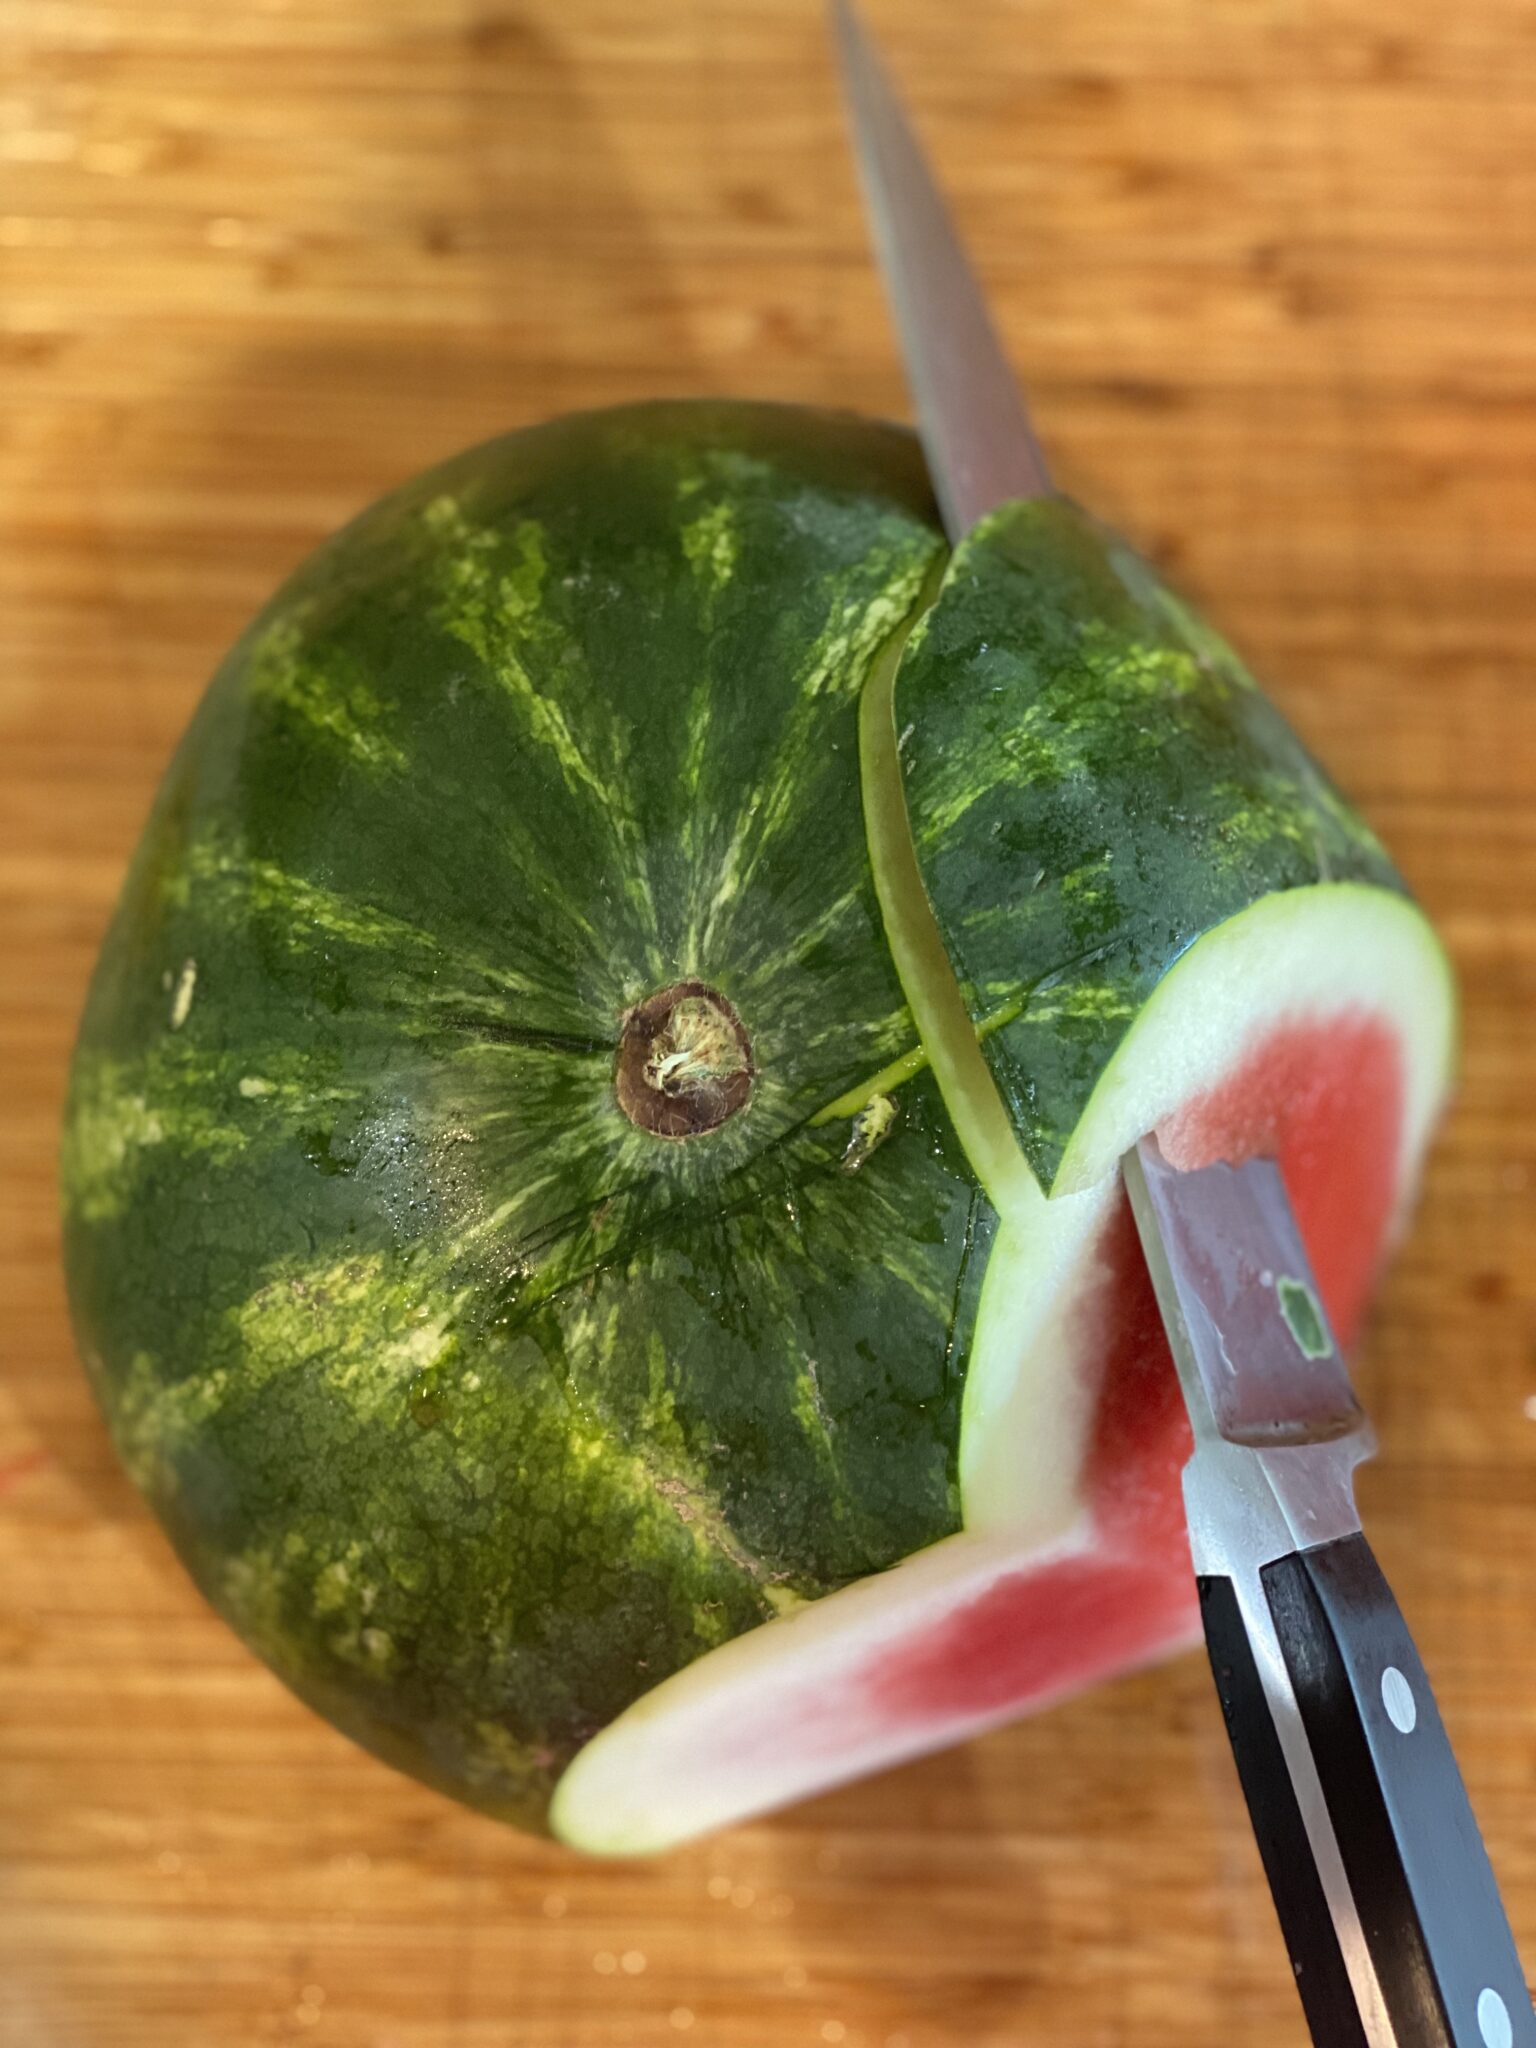 watermelon with a knife slicing it